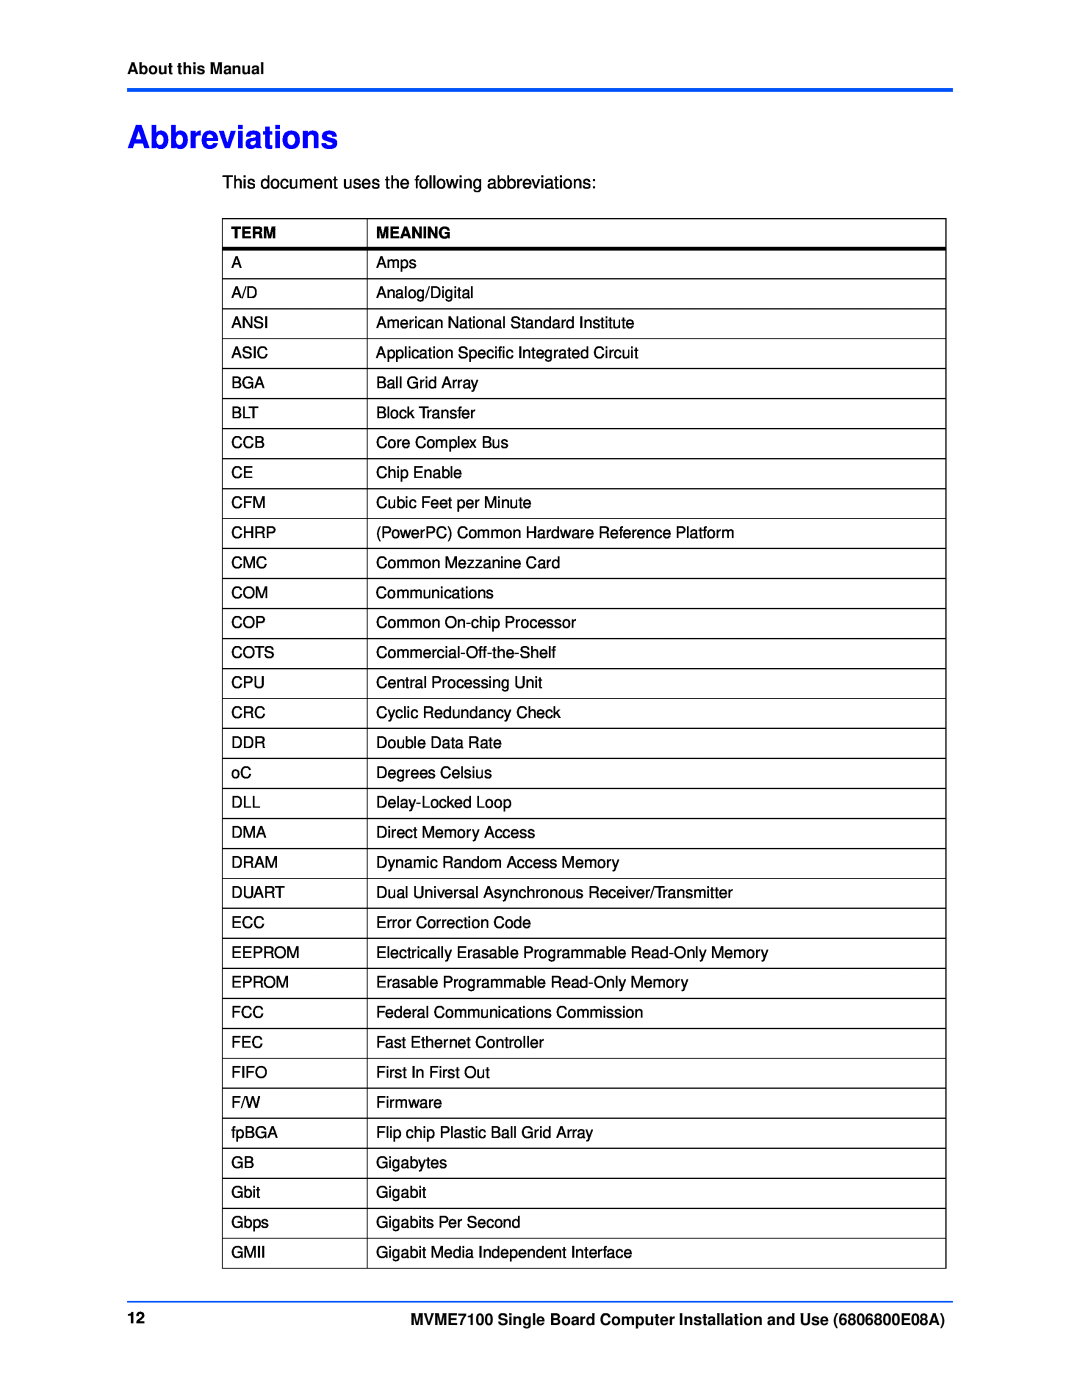 Emerson MVME7100 manual Abbreviations, About this Manual, Term, Meaning 